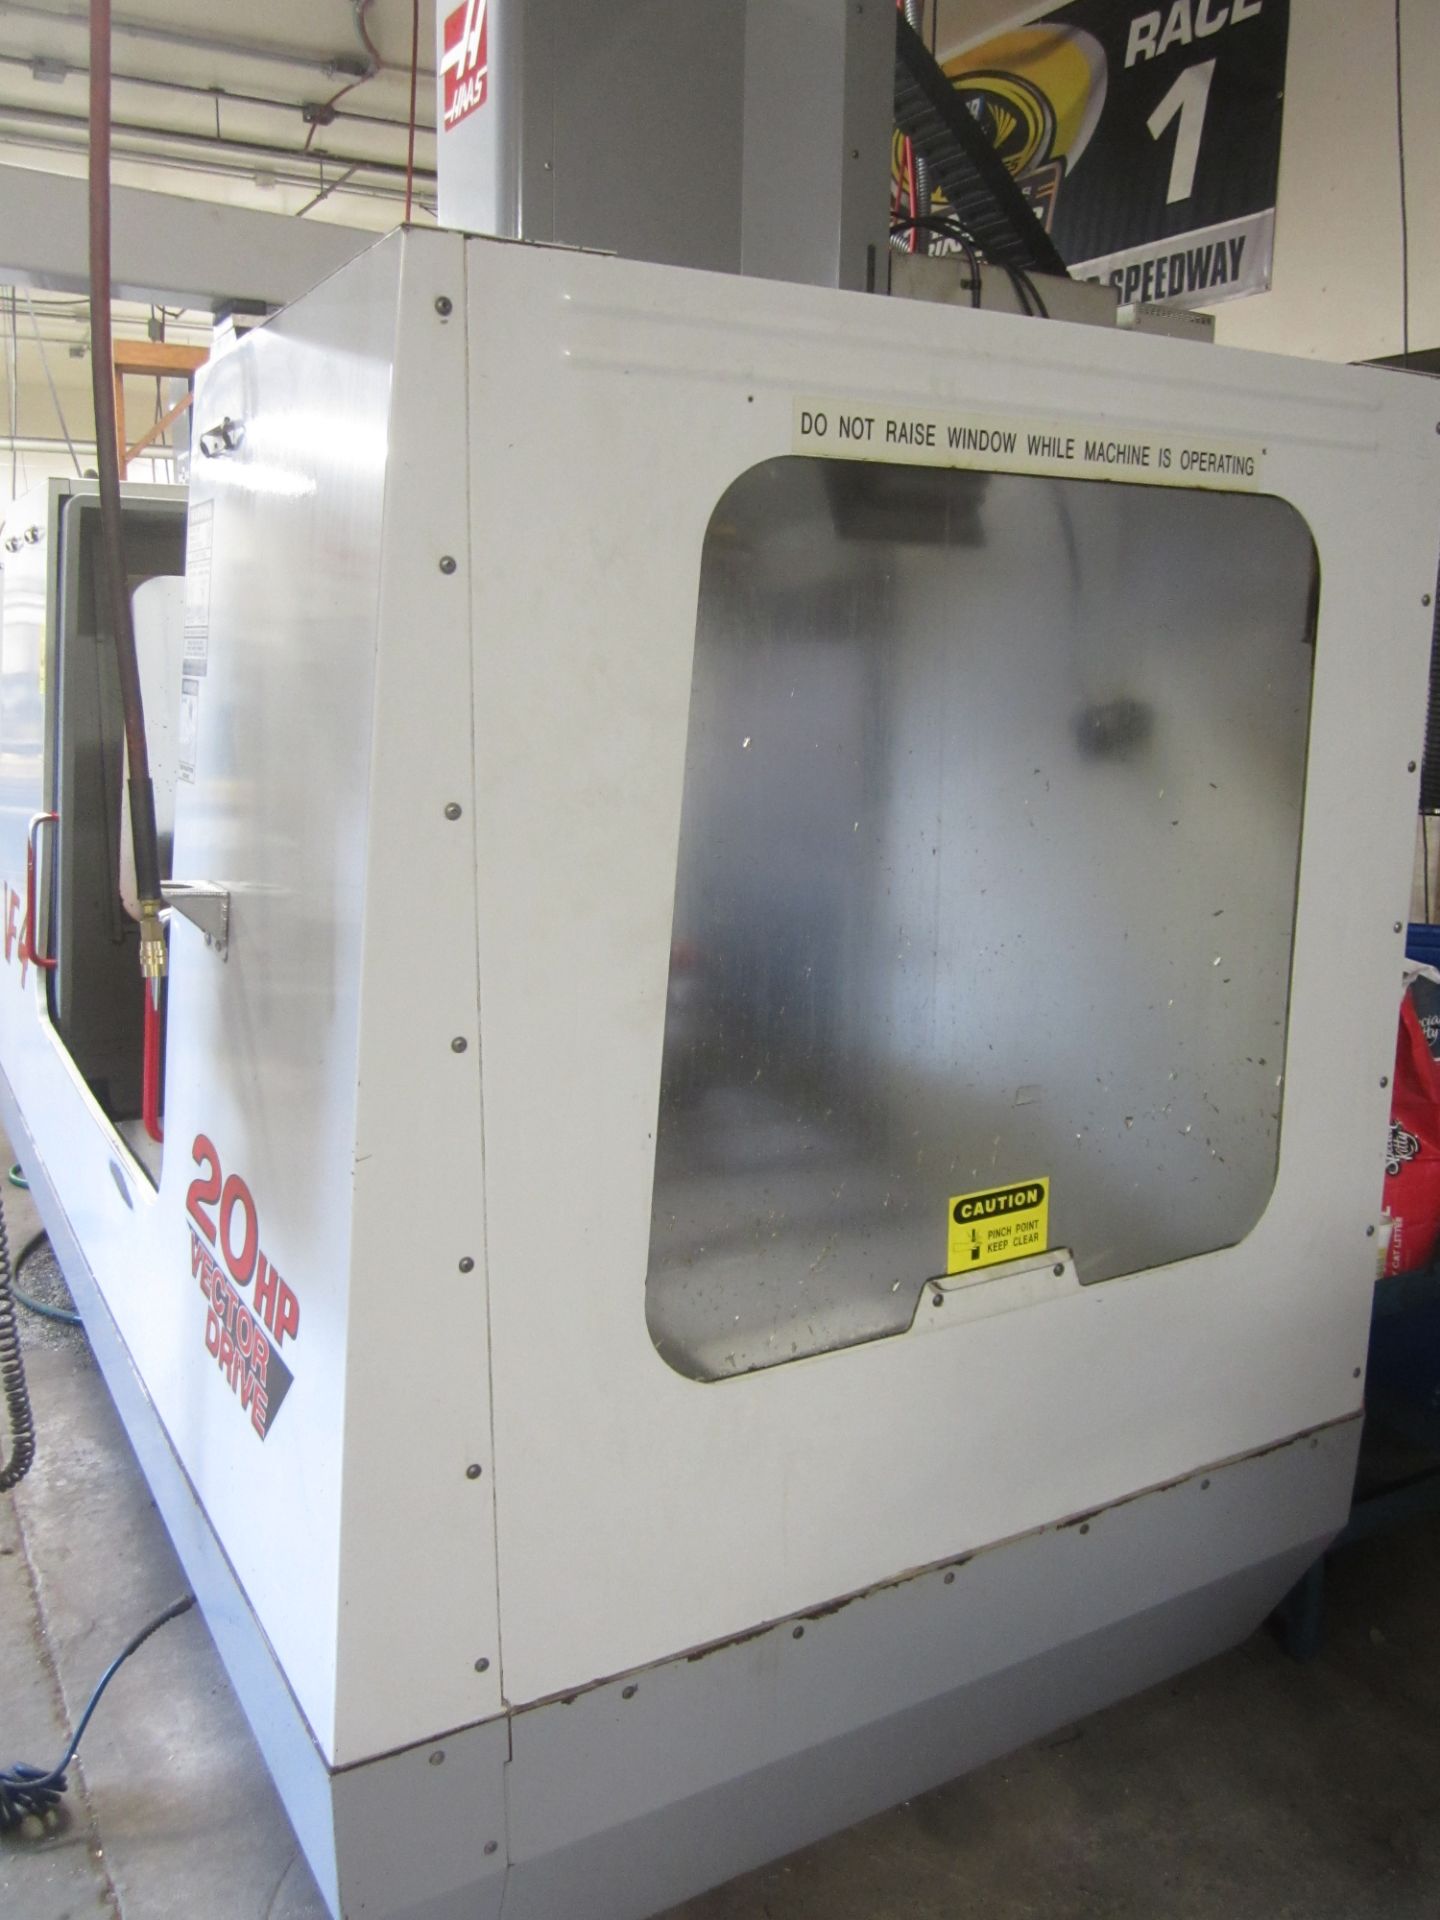 Haas VF-4 CNC Vertical Machining Center, s/n 20228, New 2000, Haas CNC Control, 20 HP, 40 Taper, - Image 12 of 16